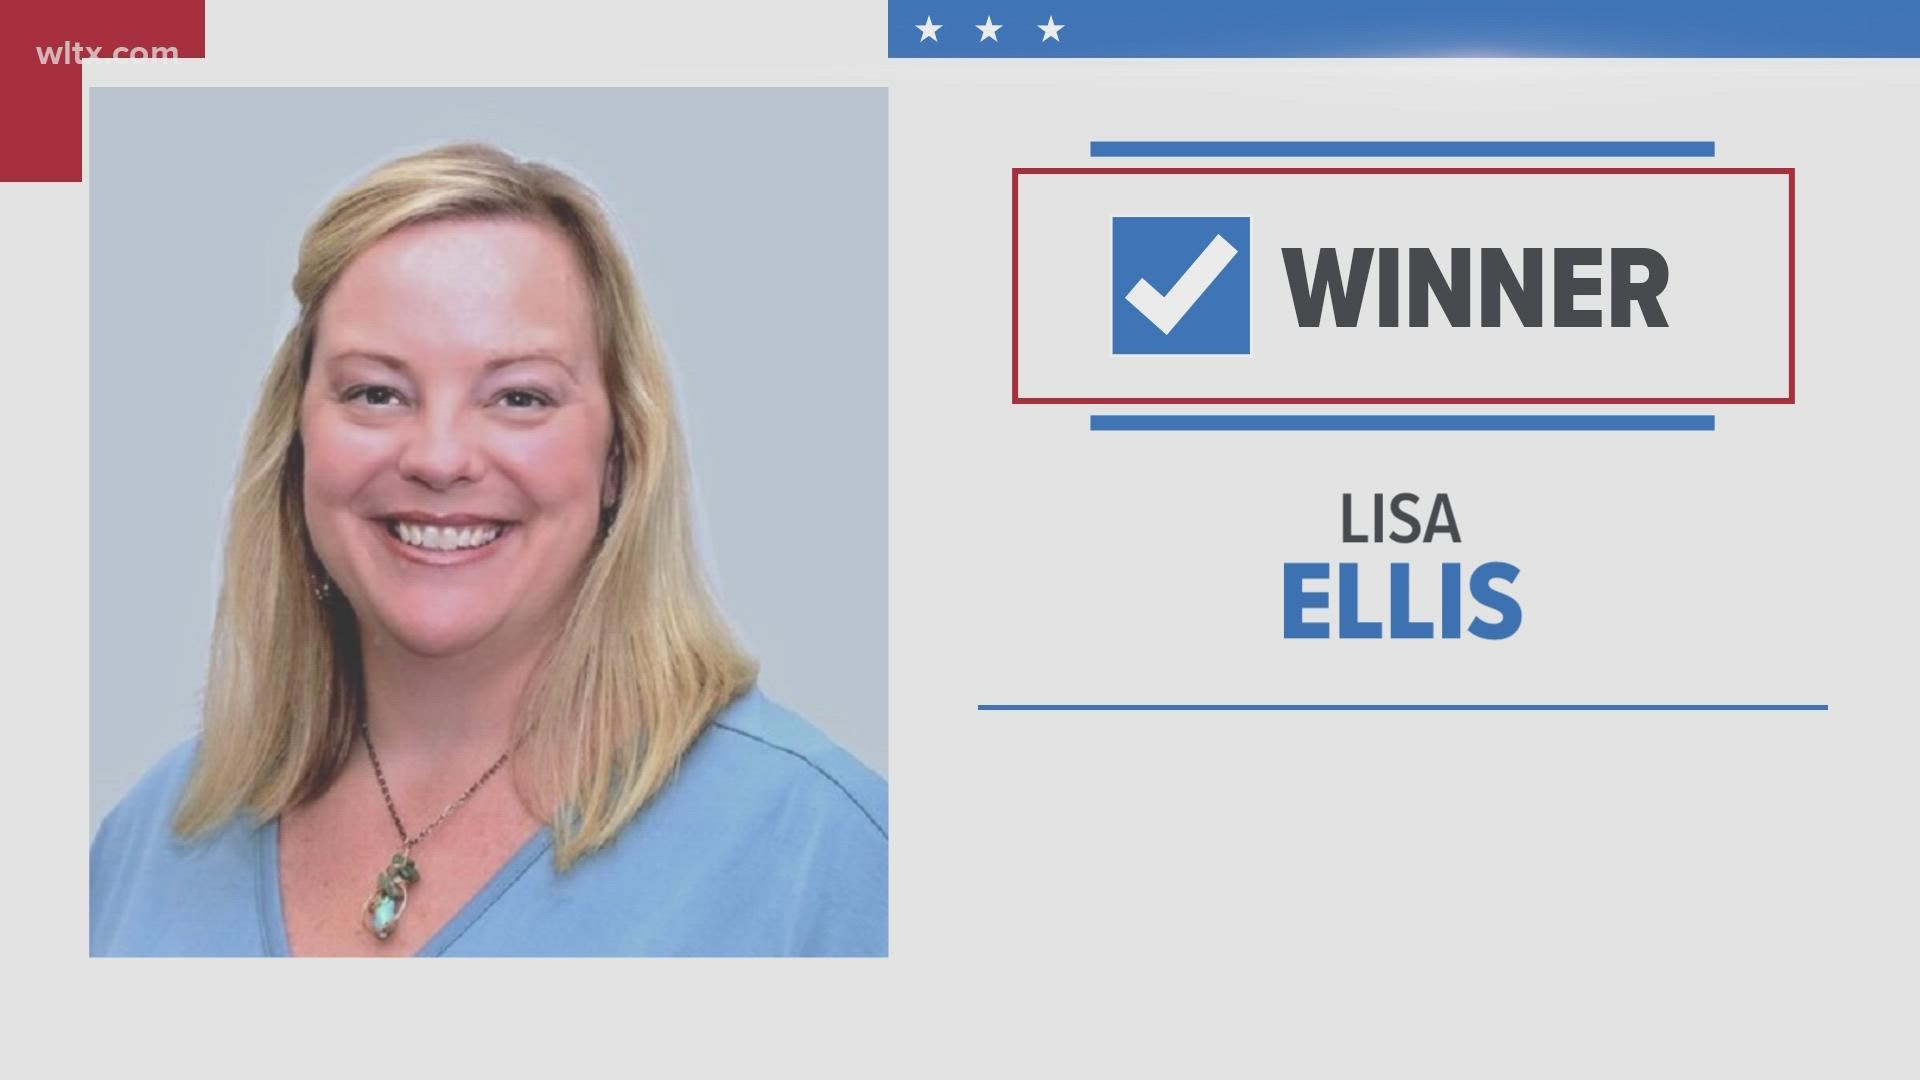 South Carolina’s election board confirmed Friday that Democratic Education Superintendent candidate Lisa Ellis avoided a runoff by 199 votes.